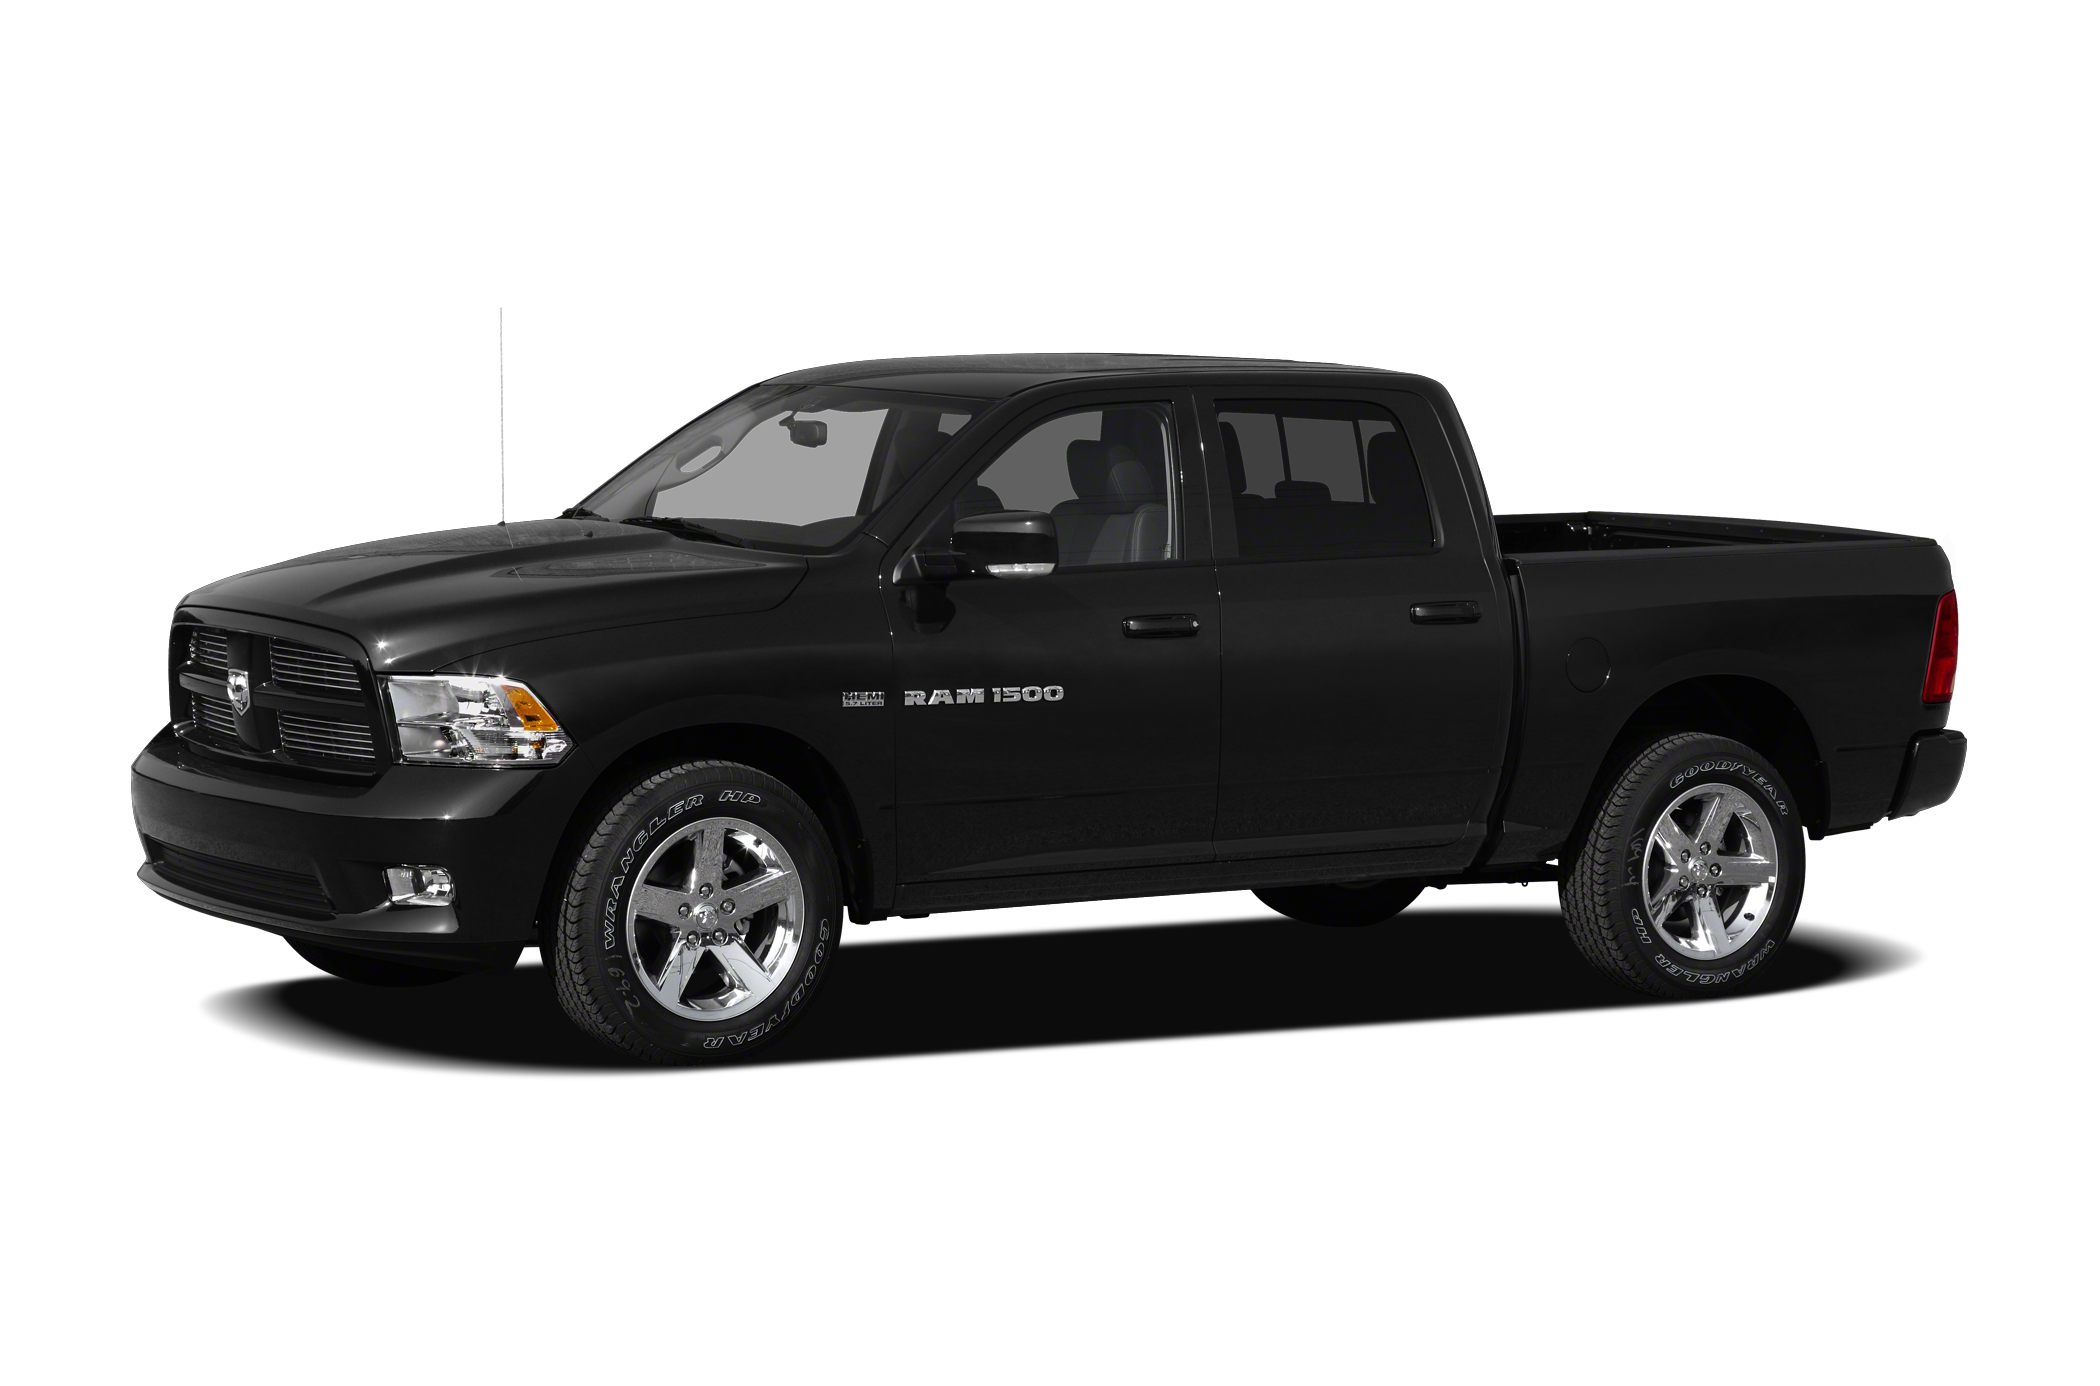 2012 Ram 1500 Laramie Longhorn Limited Edition 4x4 Crew Cab 140 In Wb Specs And Prices